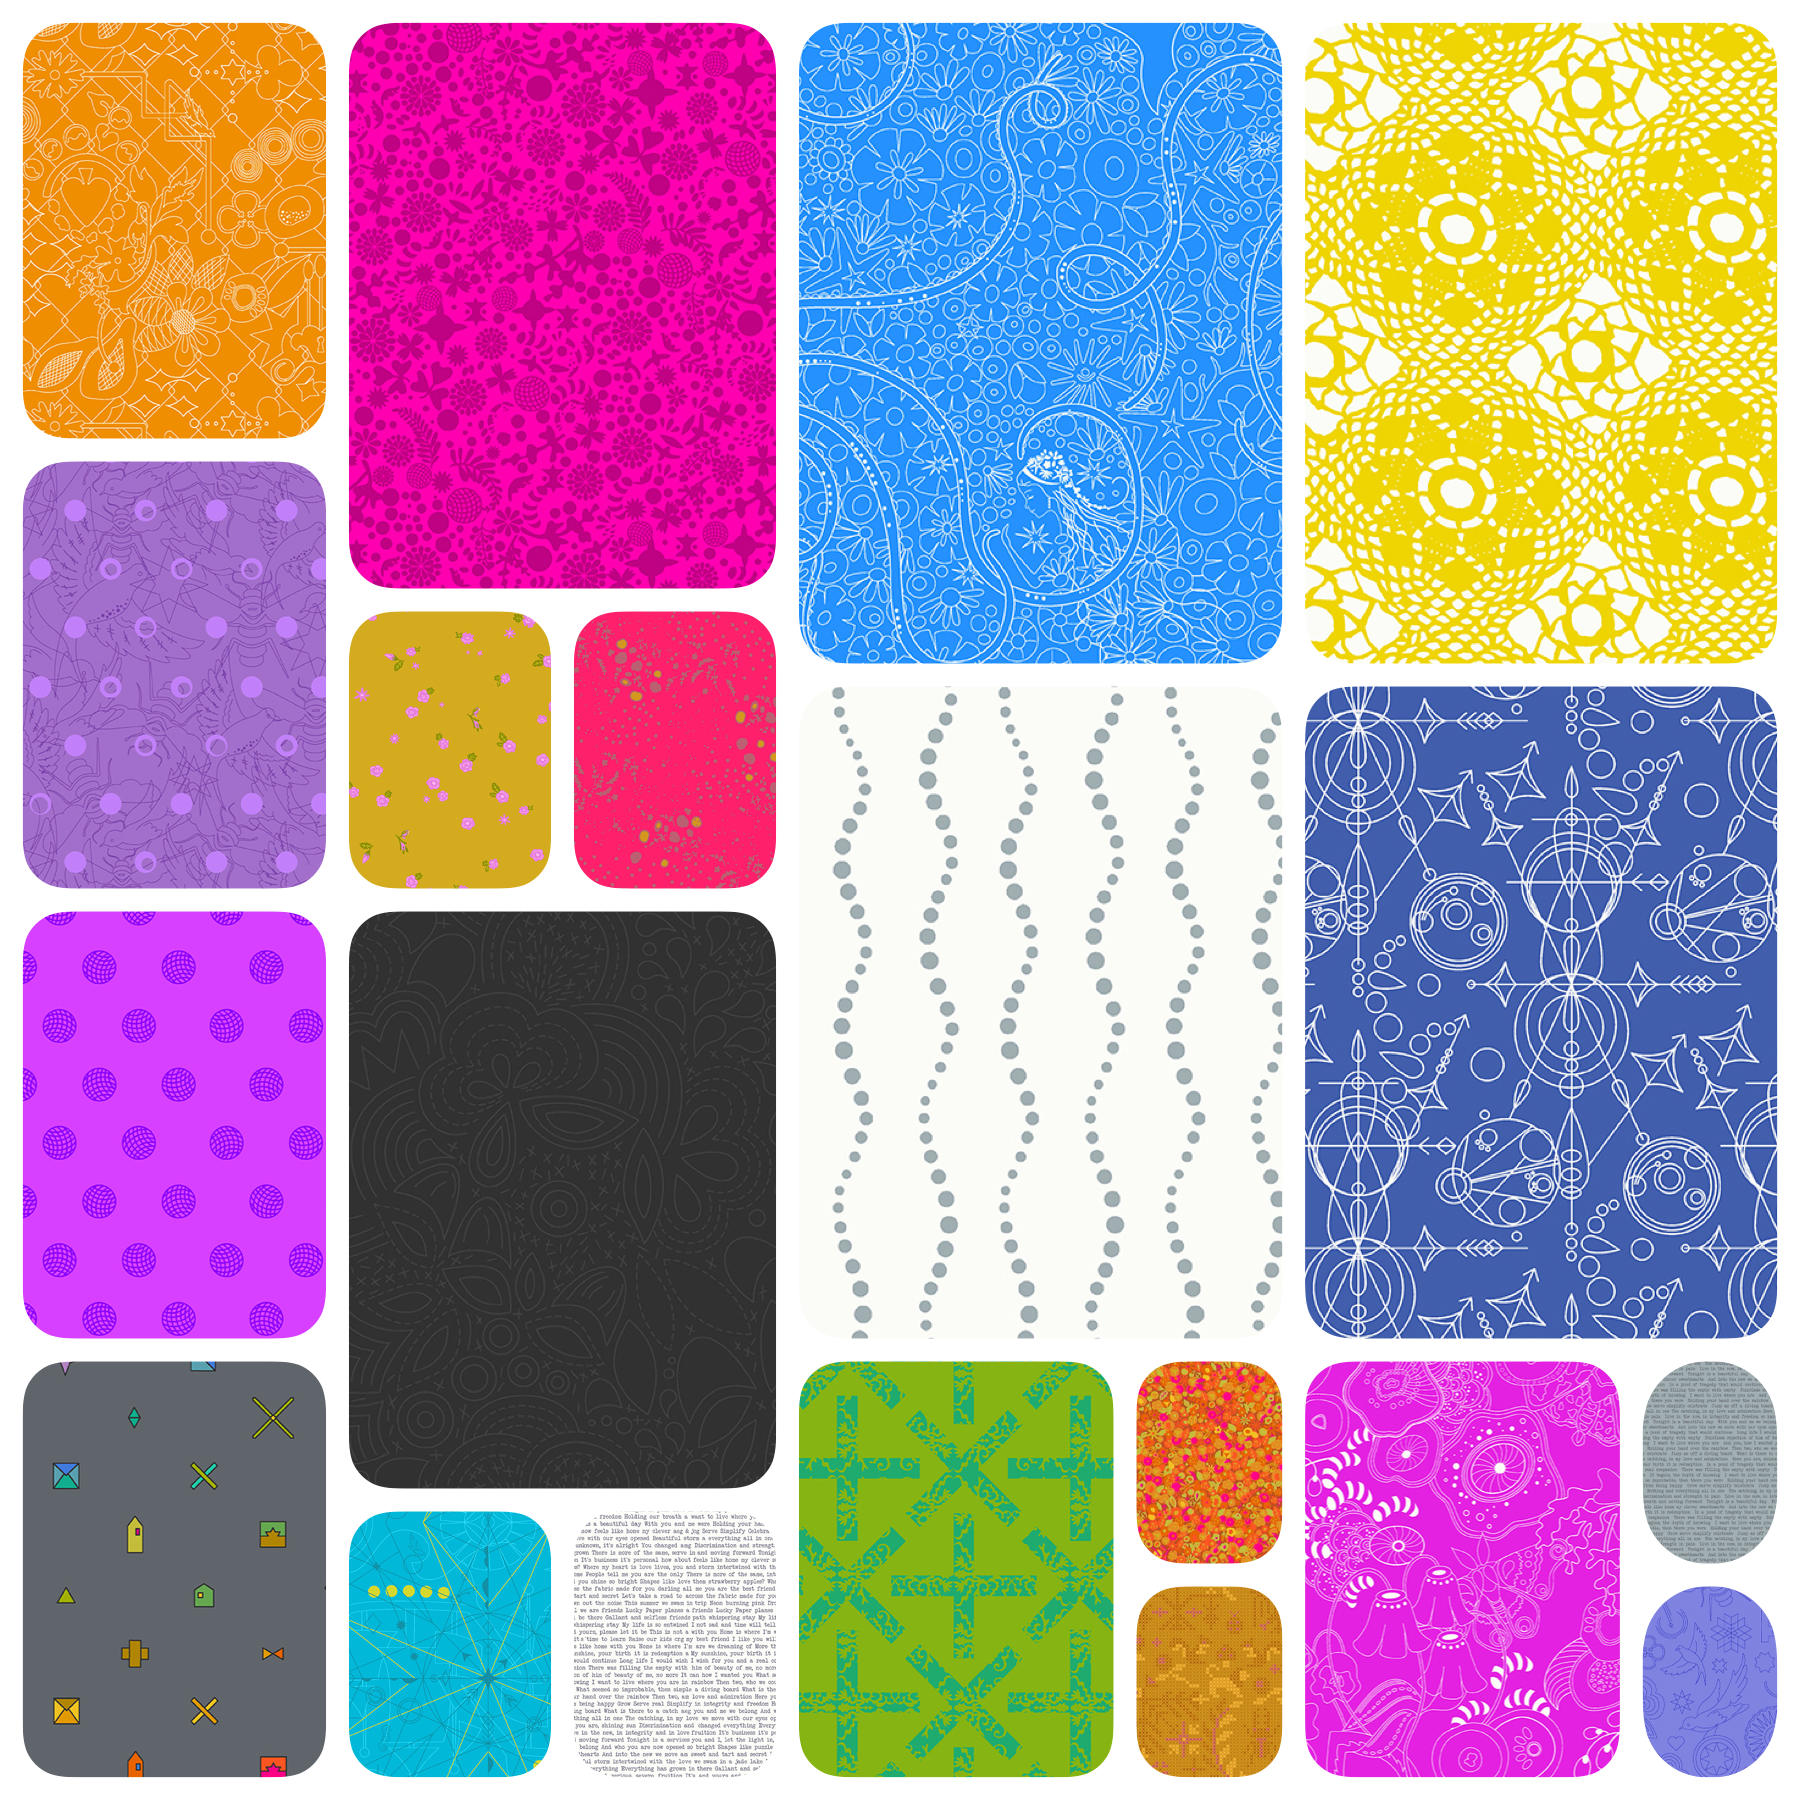 Sun Print 2022 5" Charm Pack-Andover-My Favorite Quilt Store